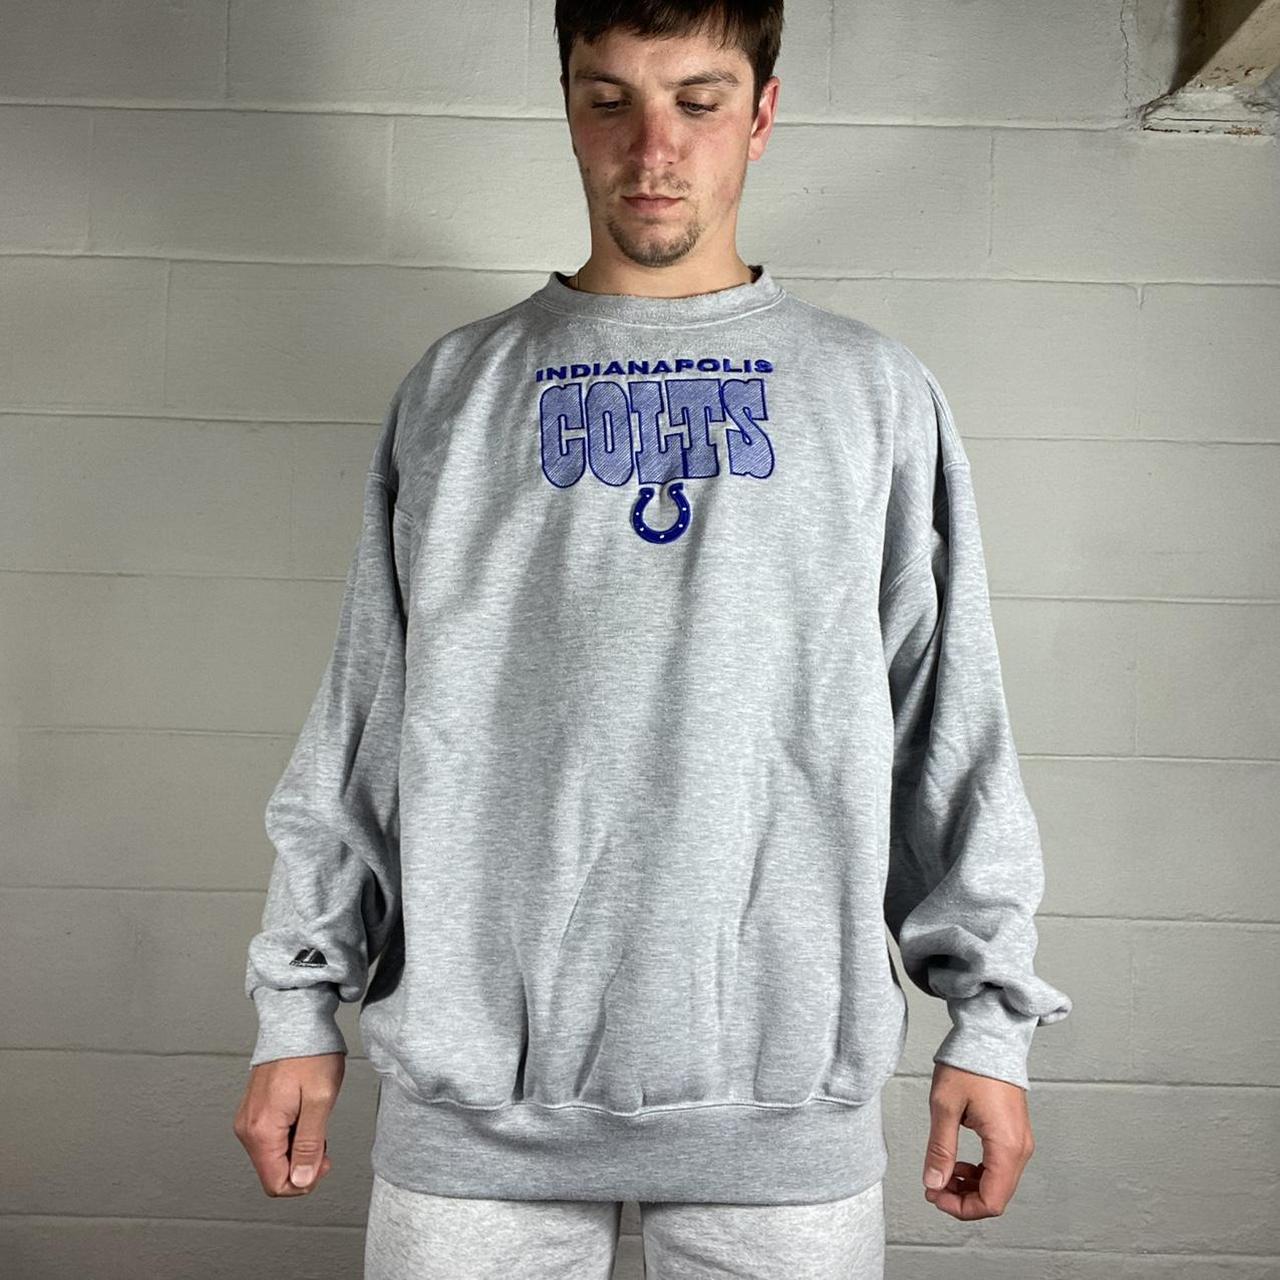 Product Image 2 - Vintage 90s grey INDIANAPOLIS COLTS